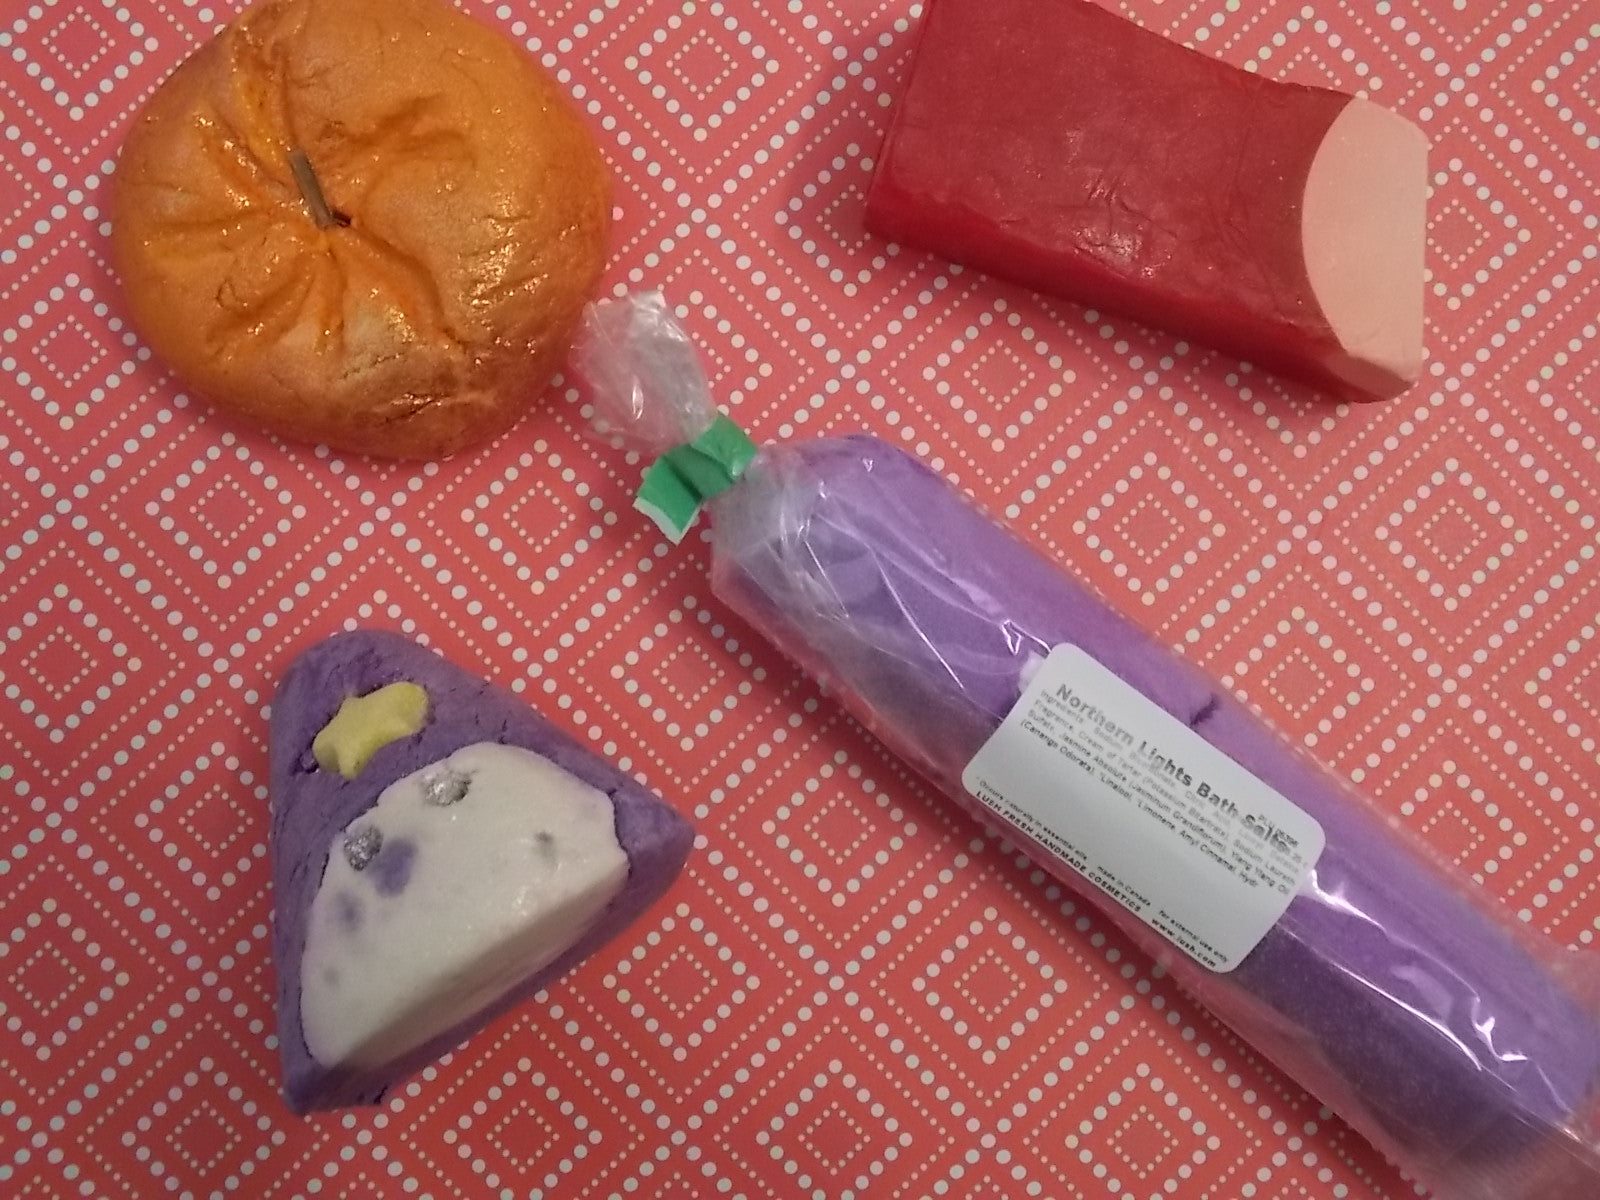 Review: LUSH Halloween Bath & Body Collection! Sparkly Pumpkin, Wizard Bubble Bar, Northern Lights Salts, Fairy Ring